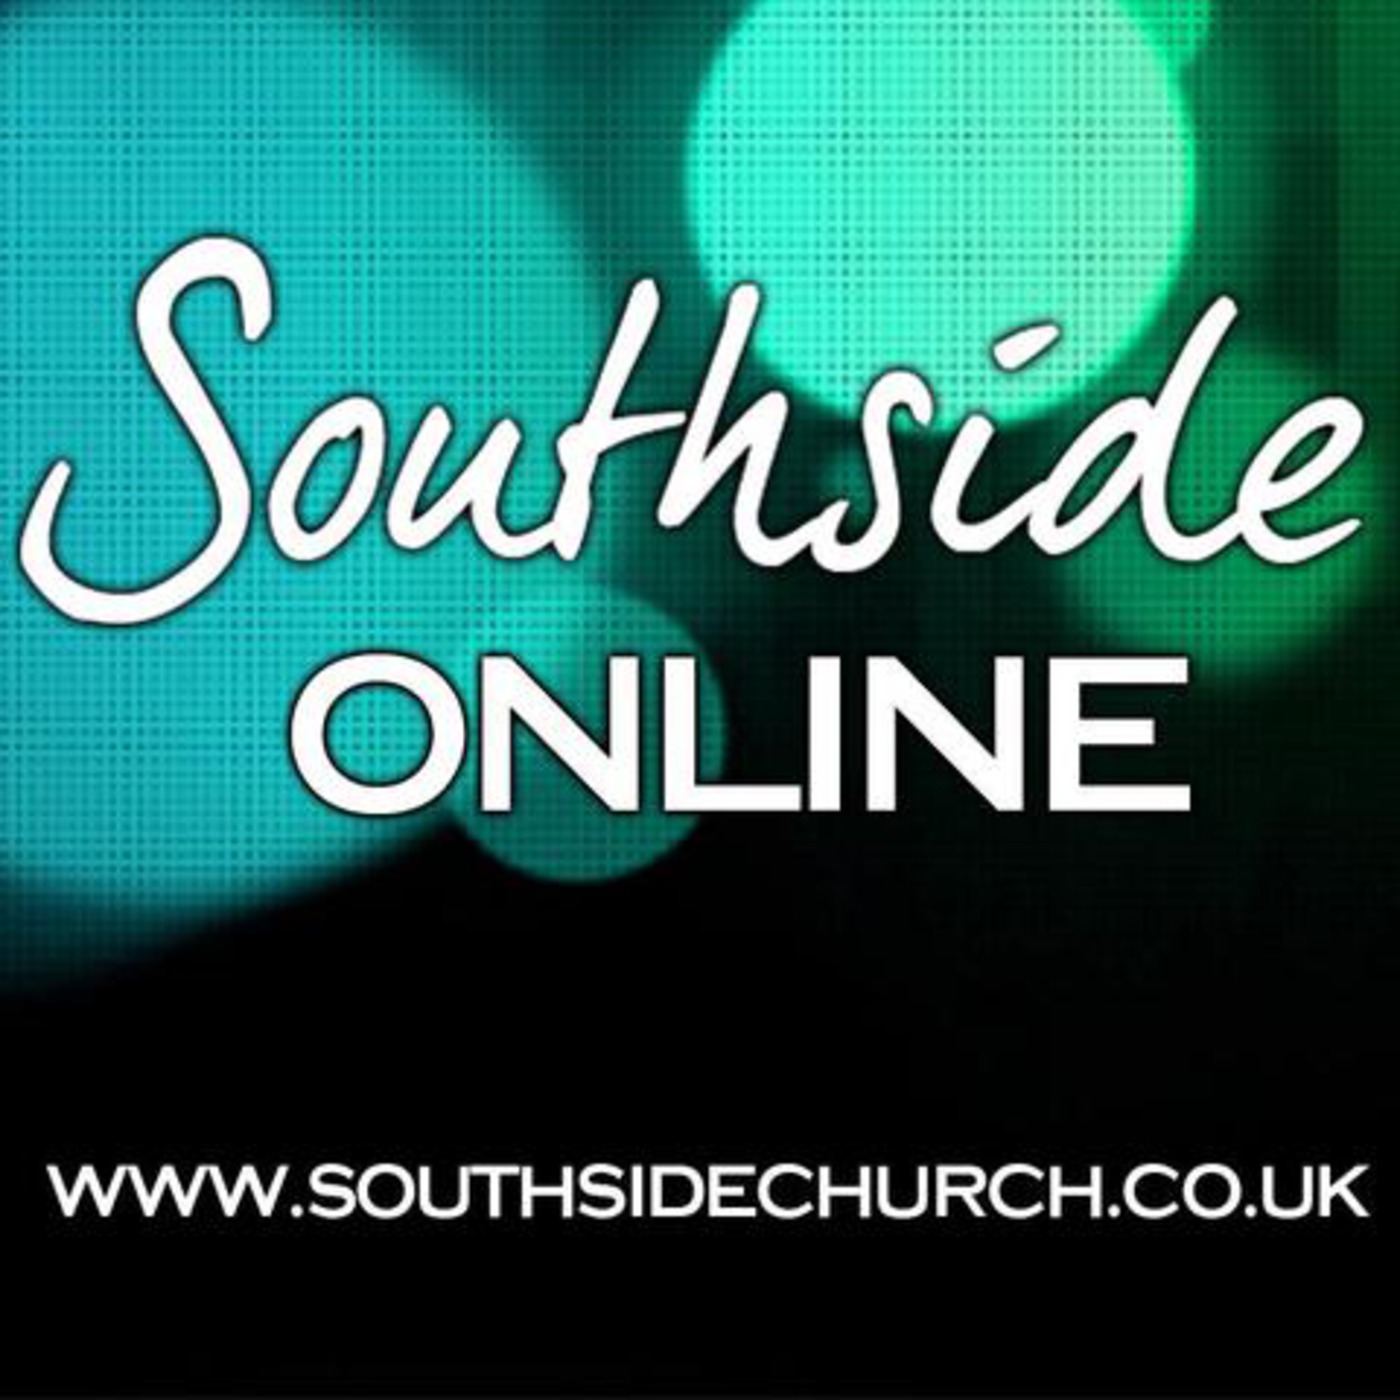 Southside Church's Podcast